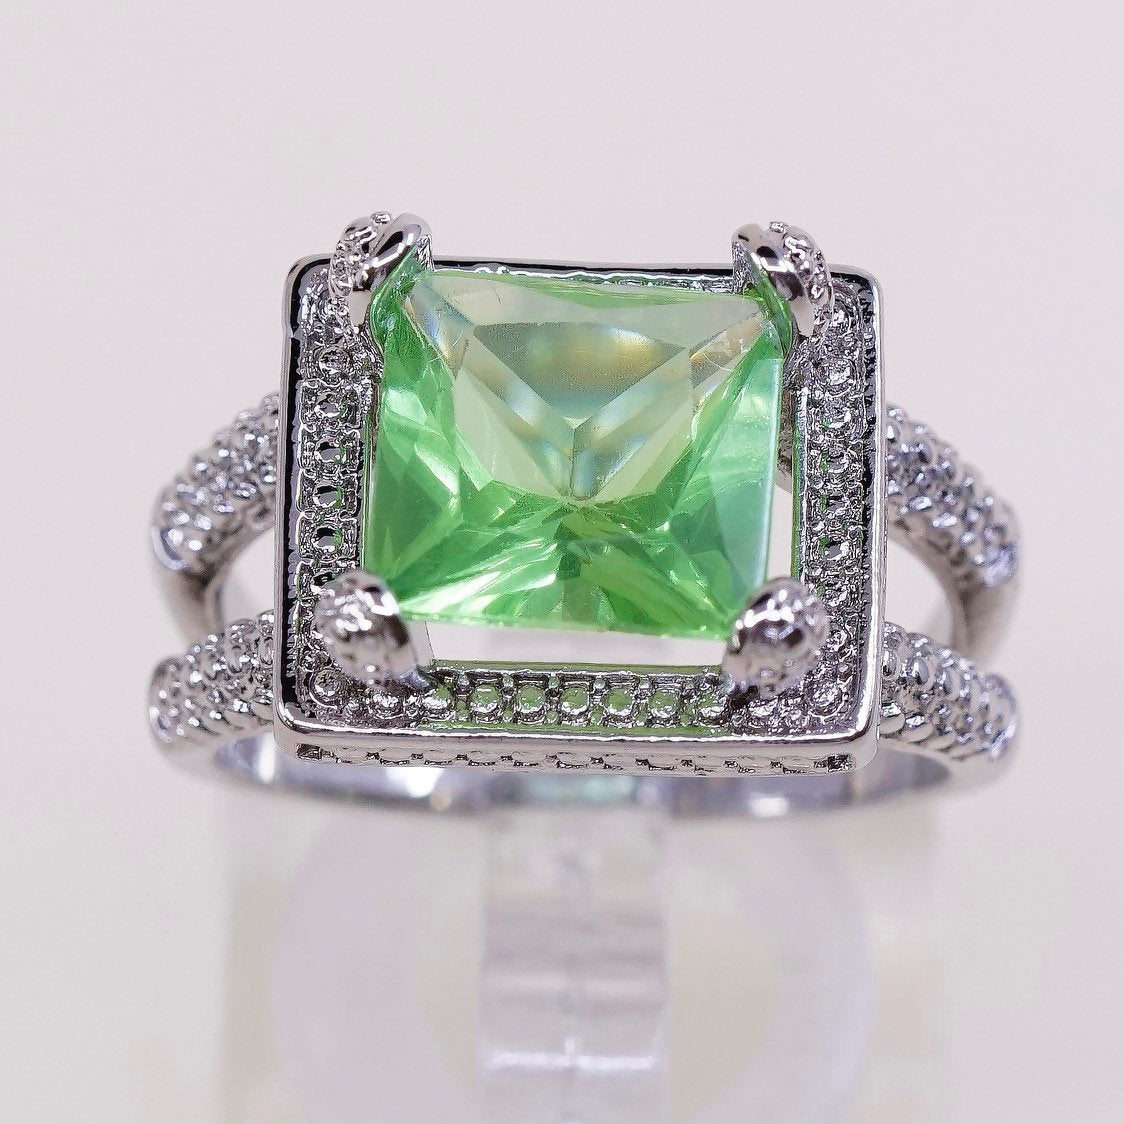 sz 8.25 sterling silver ring, platinum over 925 cocktail ring w/ green n Cz